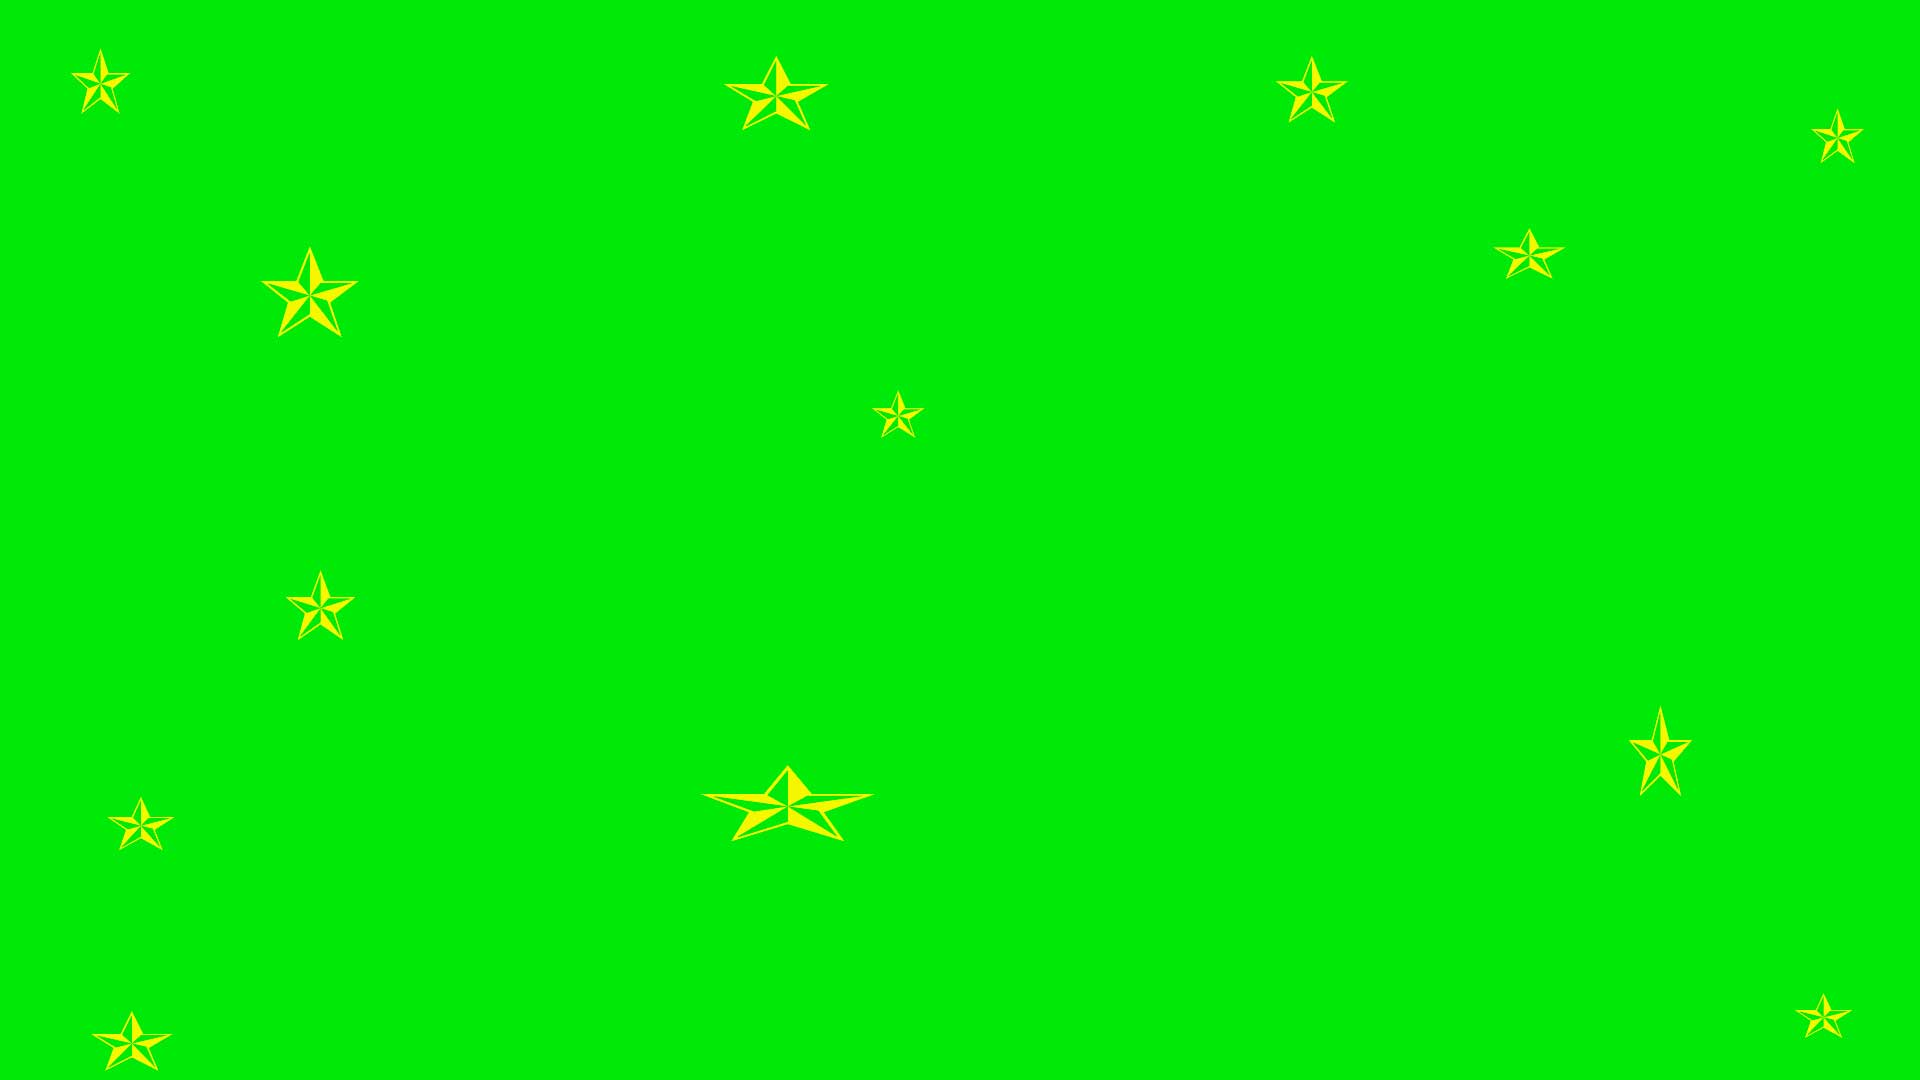 Wallpaper For > Lime Green Background